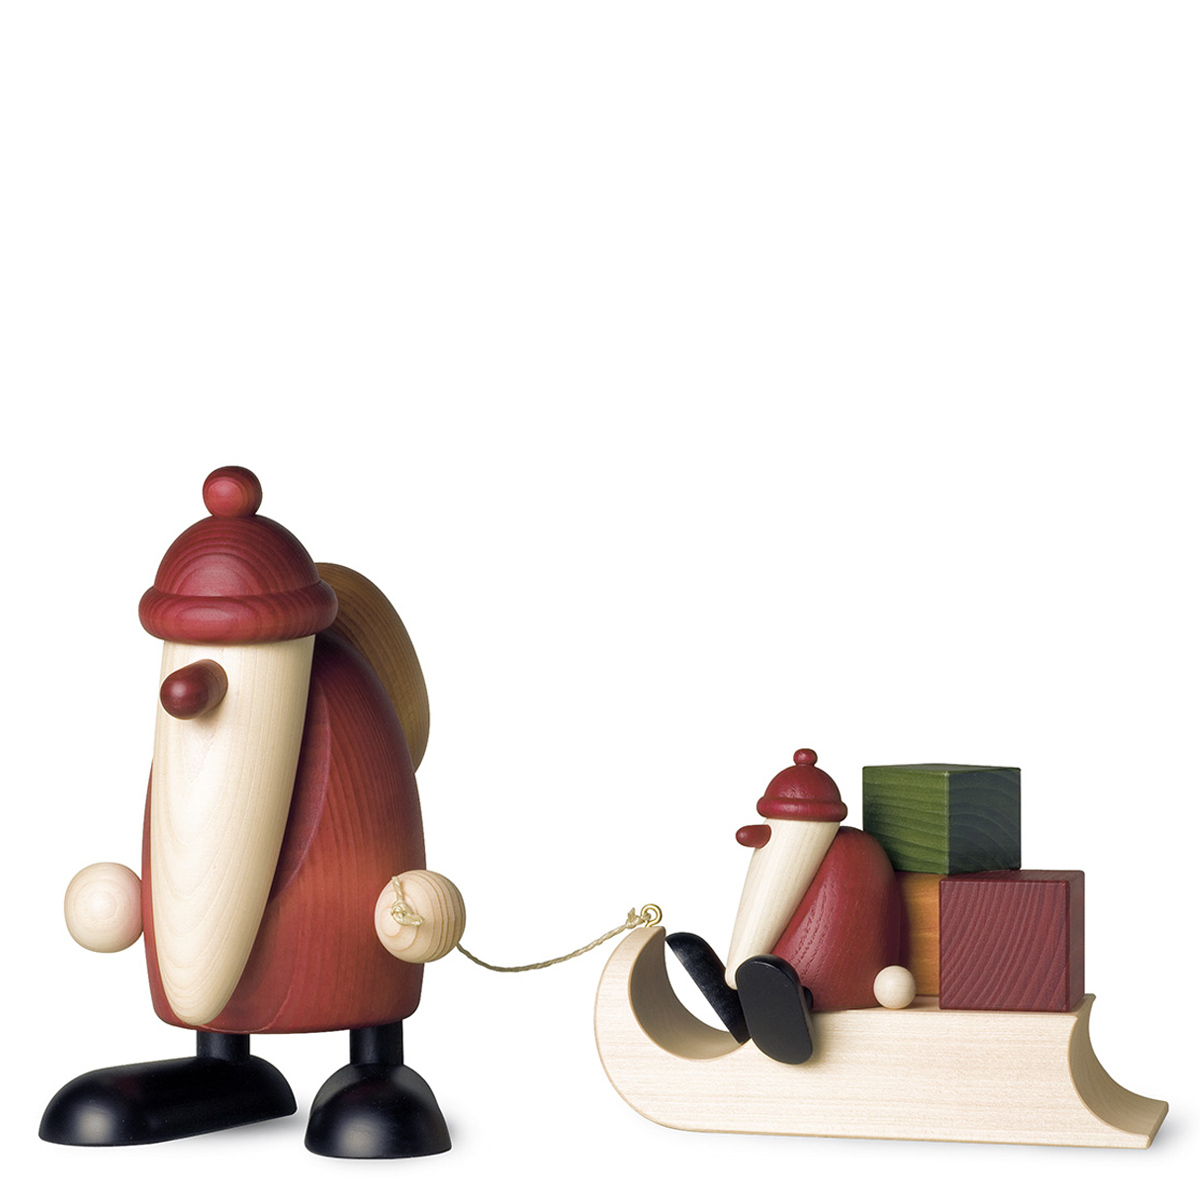 Santa Claus with a child and presents on a sledge, large